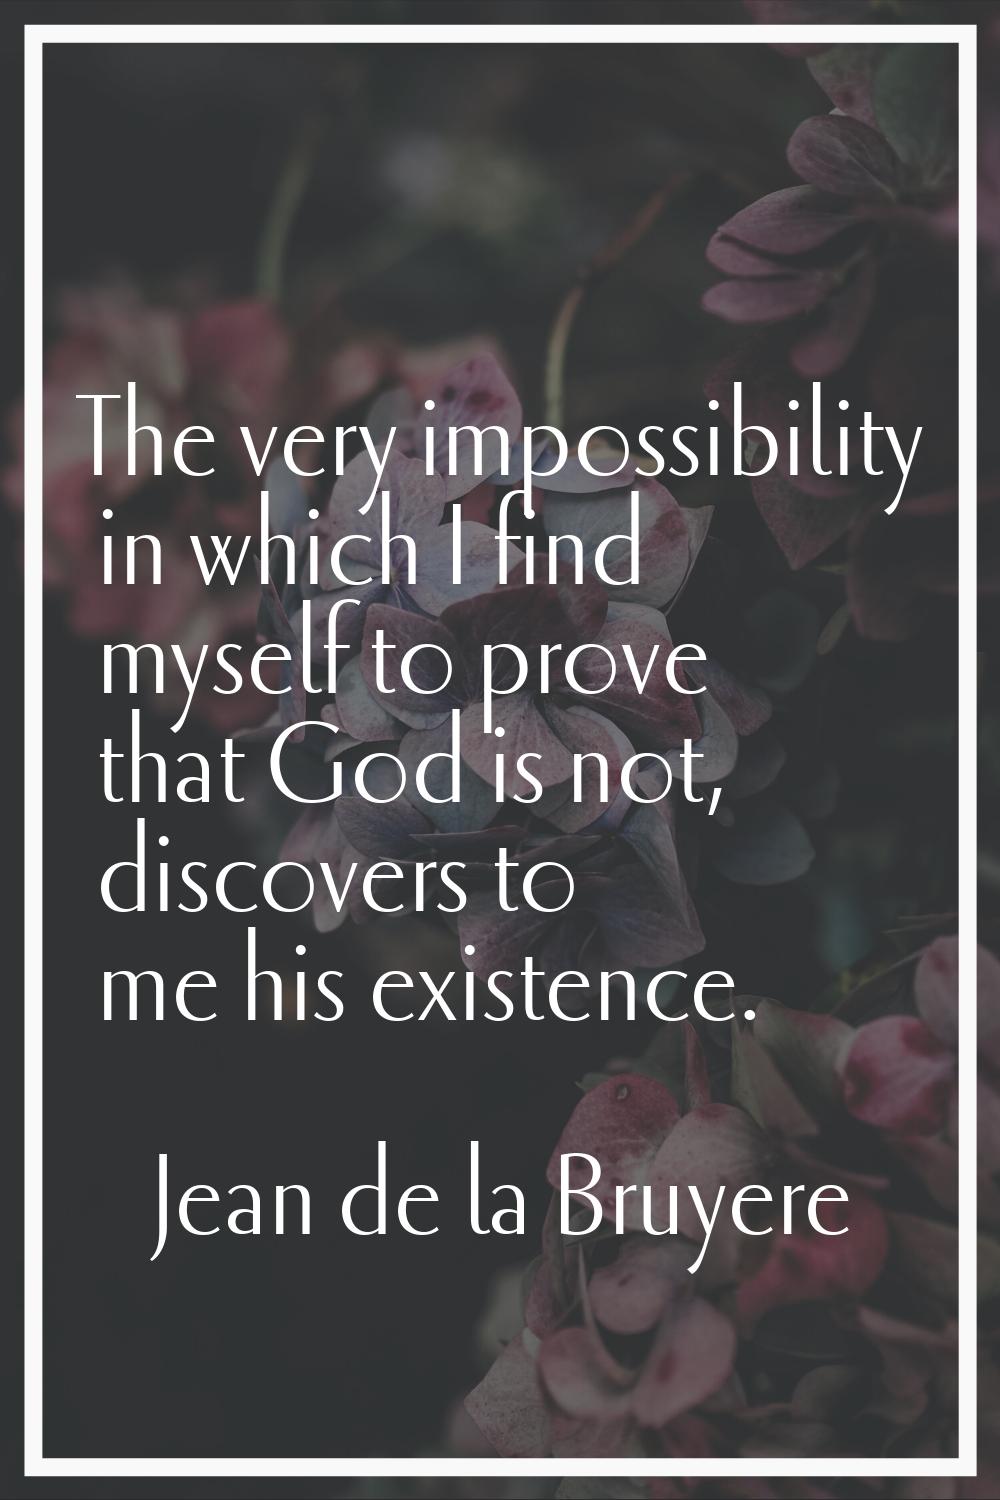 The very impossibility in which I find myself to prove that God is not, discovers to me his existen